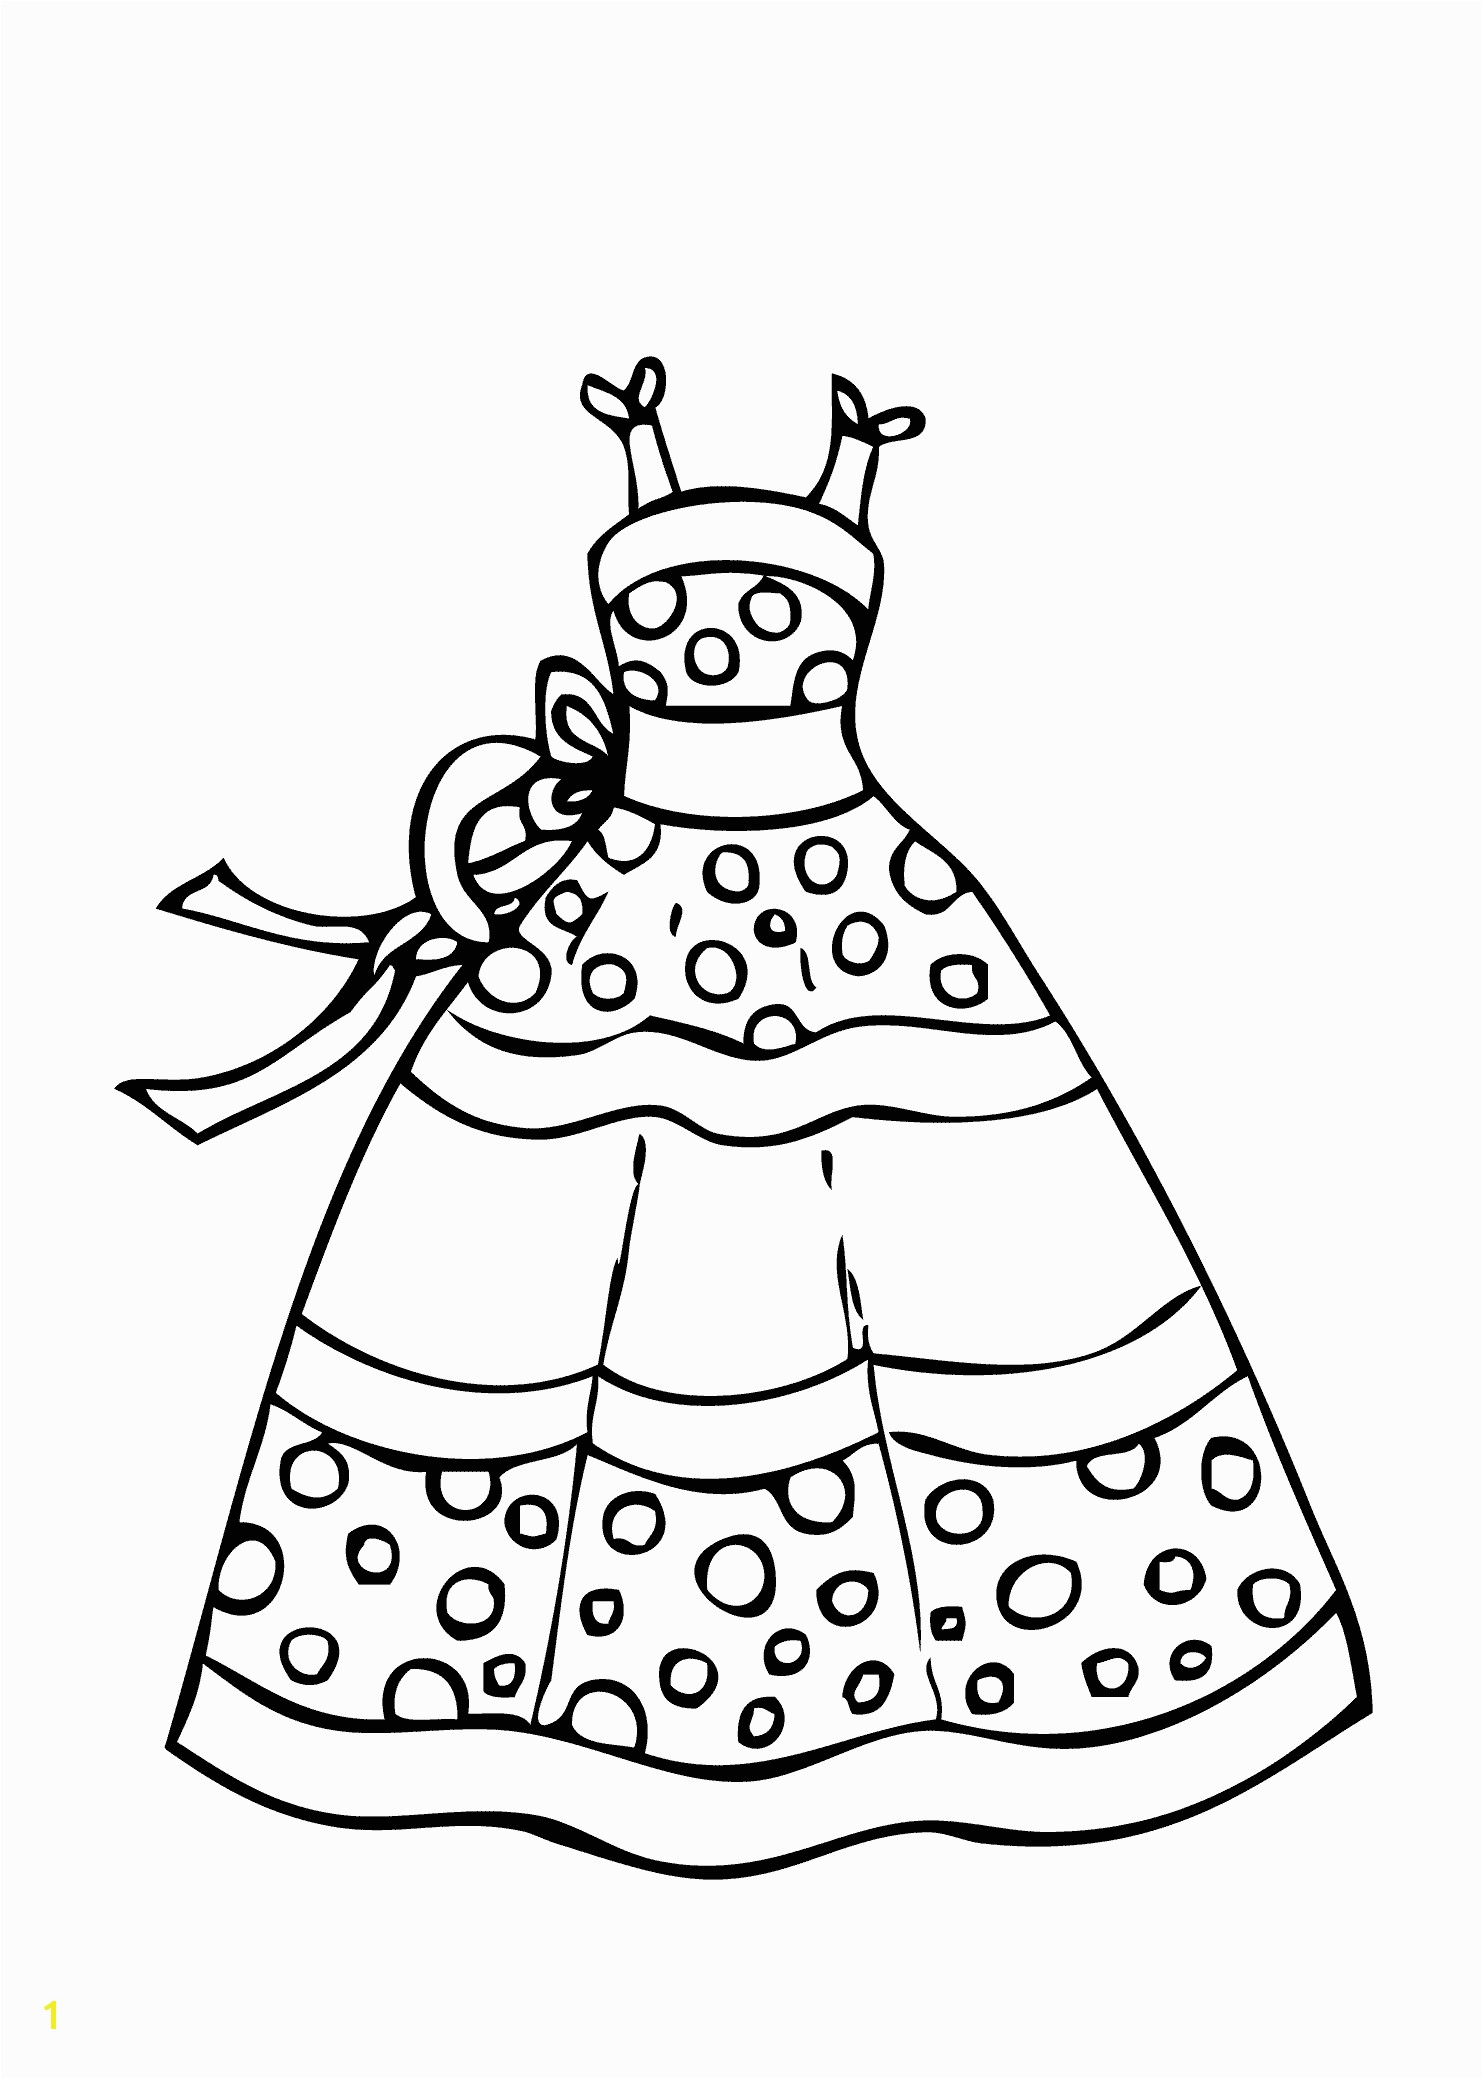 Pretty Little Liars Coloring Pages Instructive Dresses Colouring Pages Beautiful Unknown